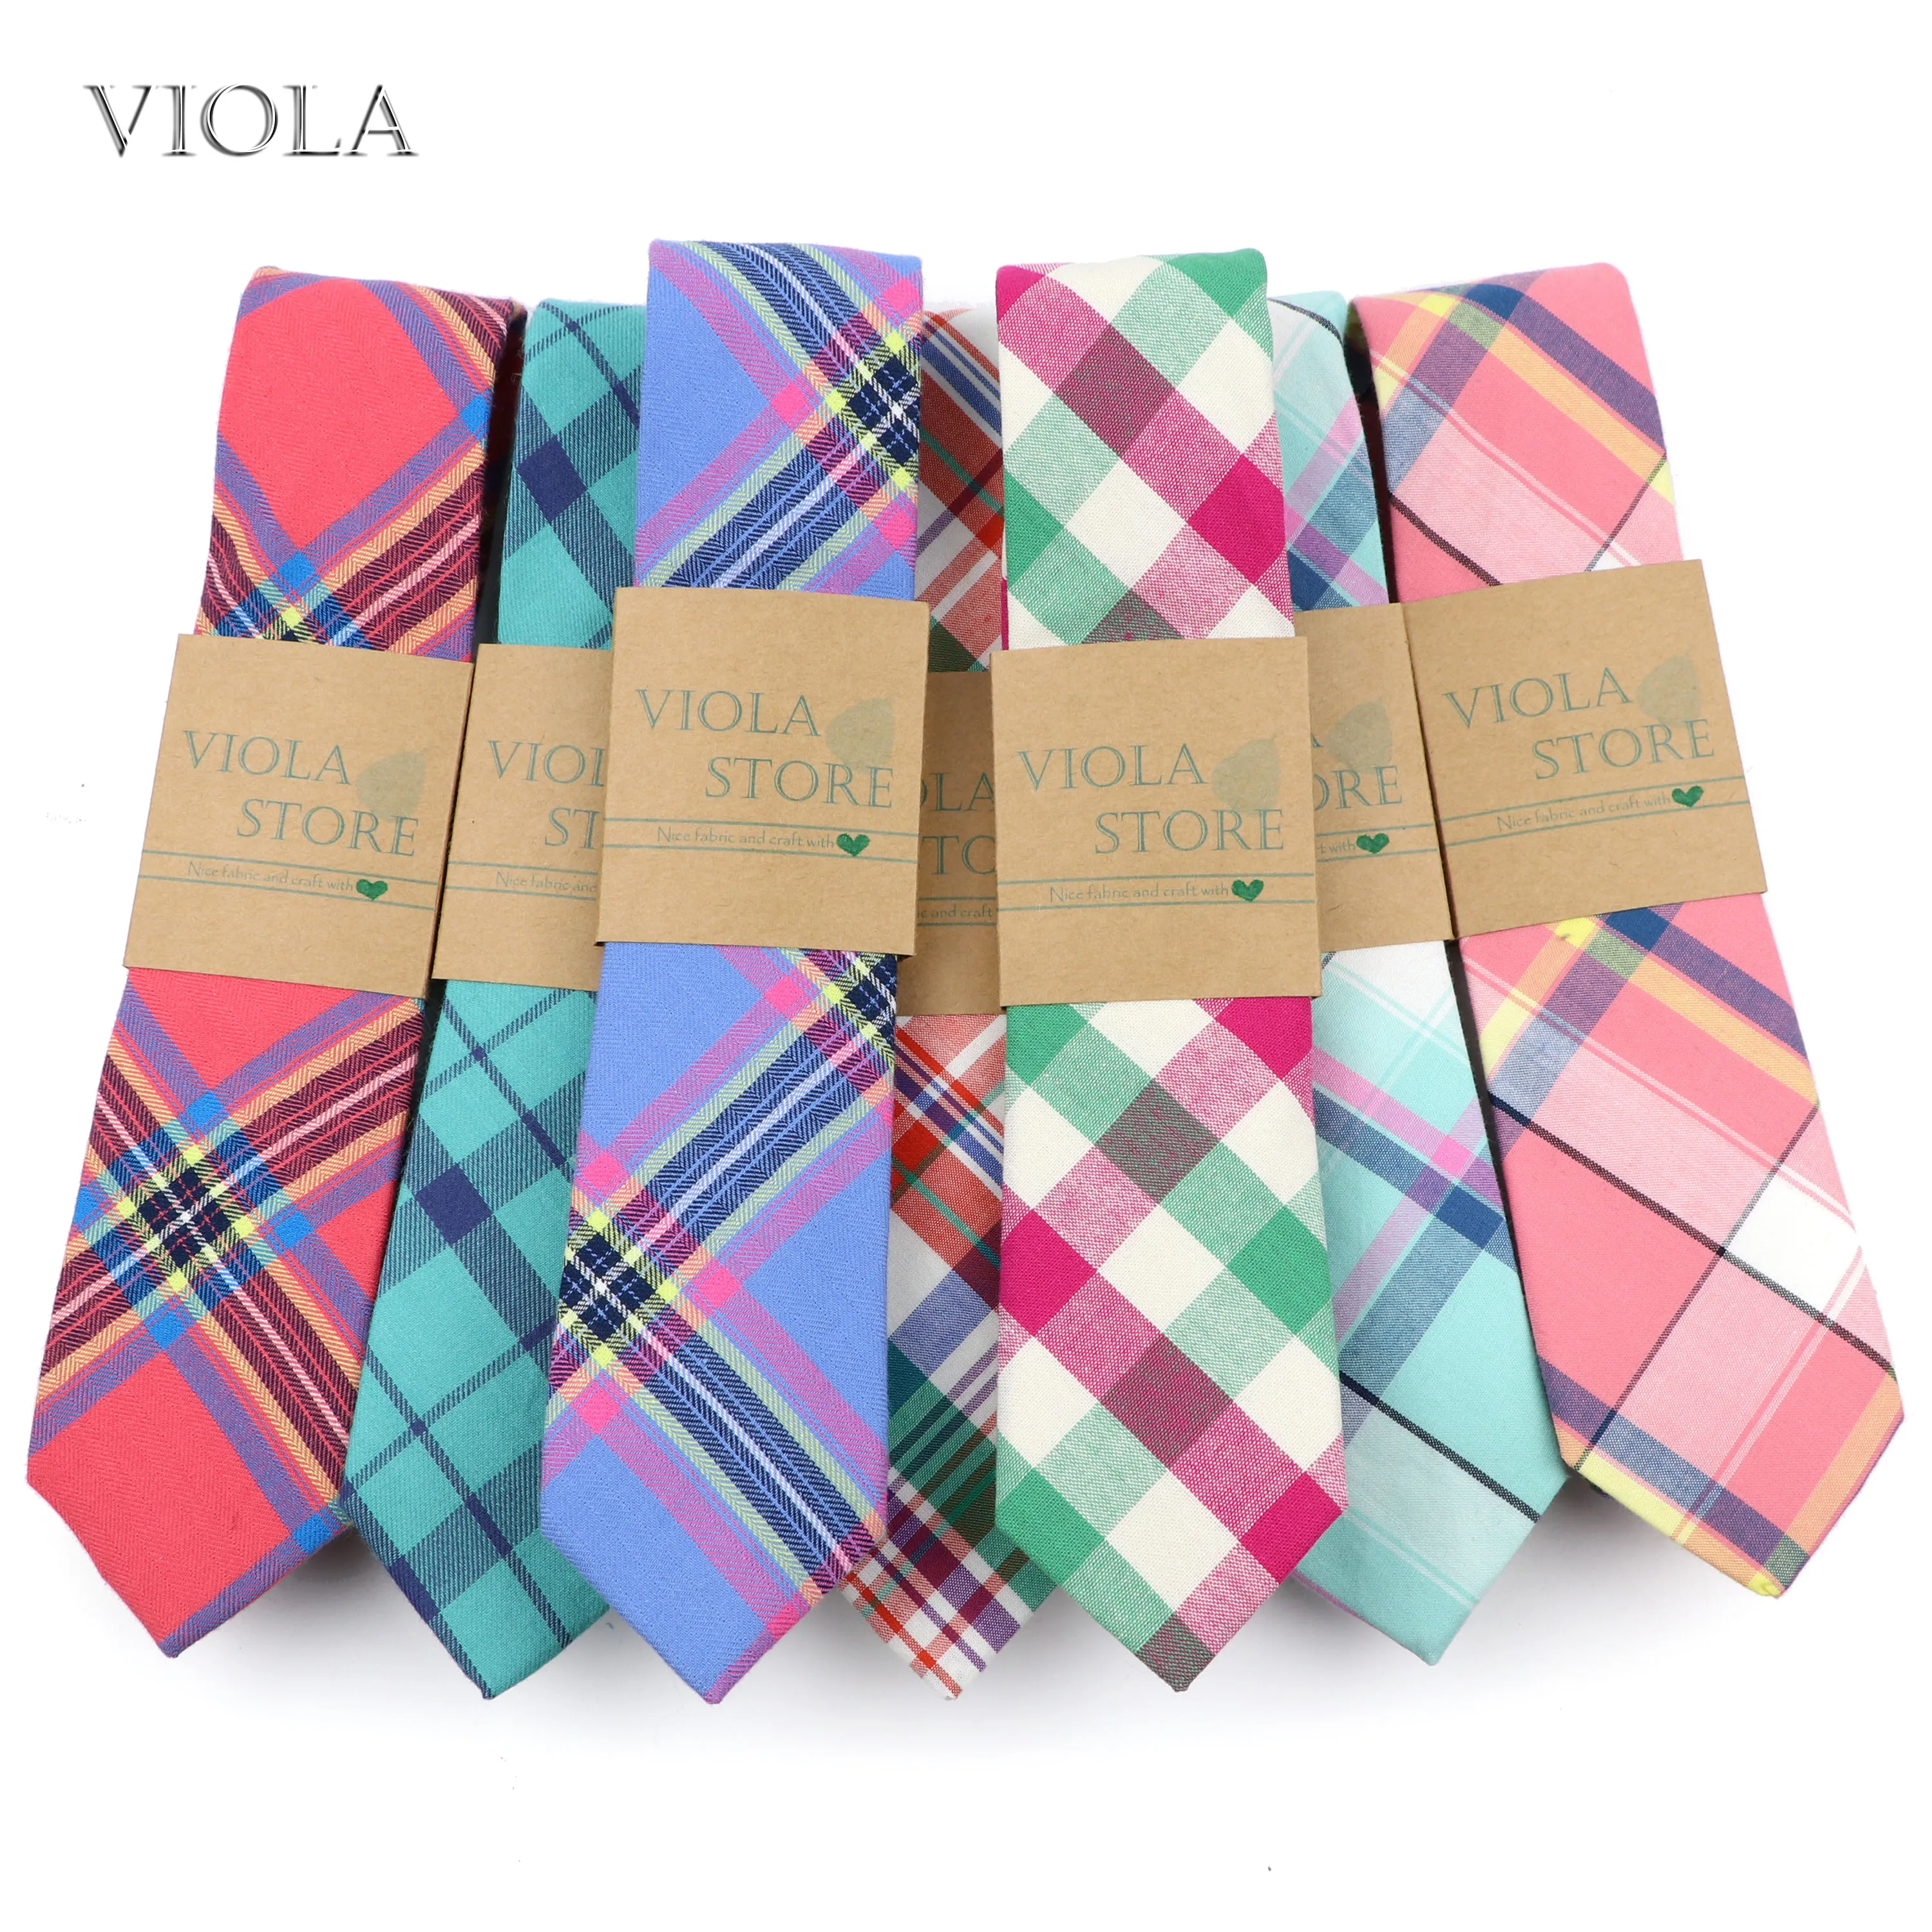 

Young Men Soft Cotton Striped Plaid Necktie Mint Green Pink 6cm Casual Skinny Ties Tuxedo Party Fashion Cravat Gift Accessory